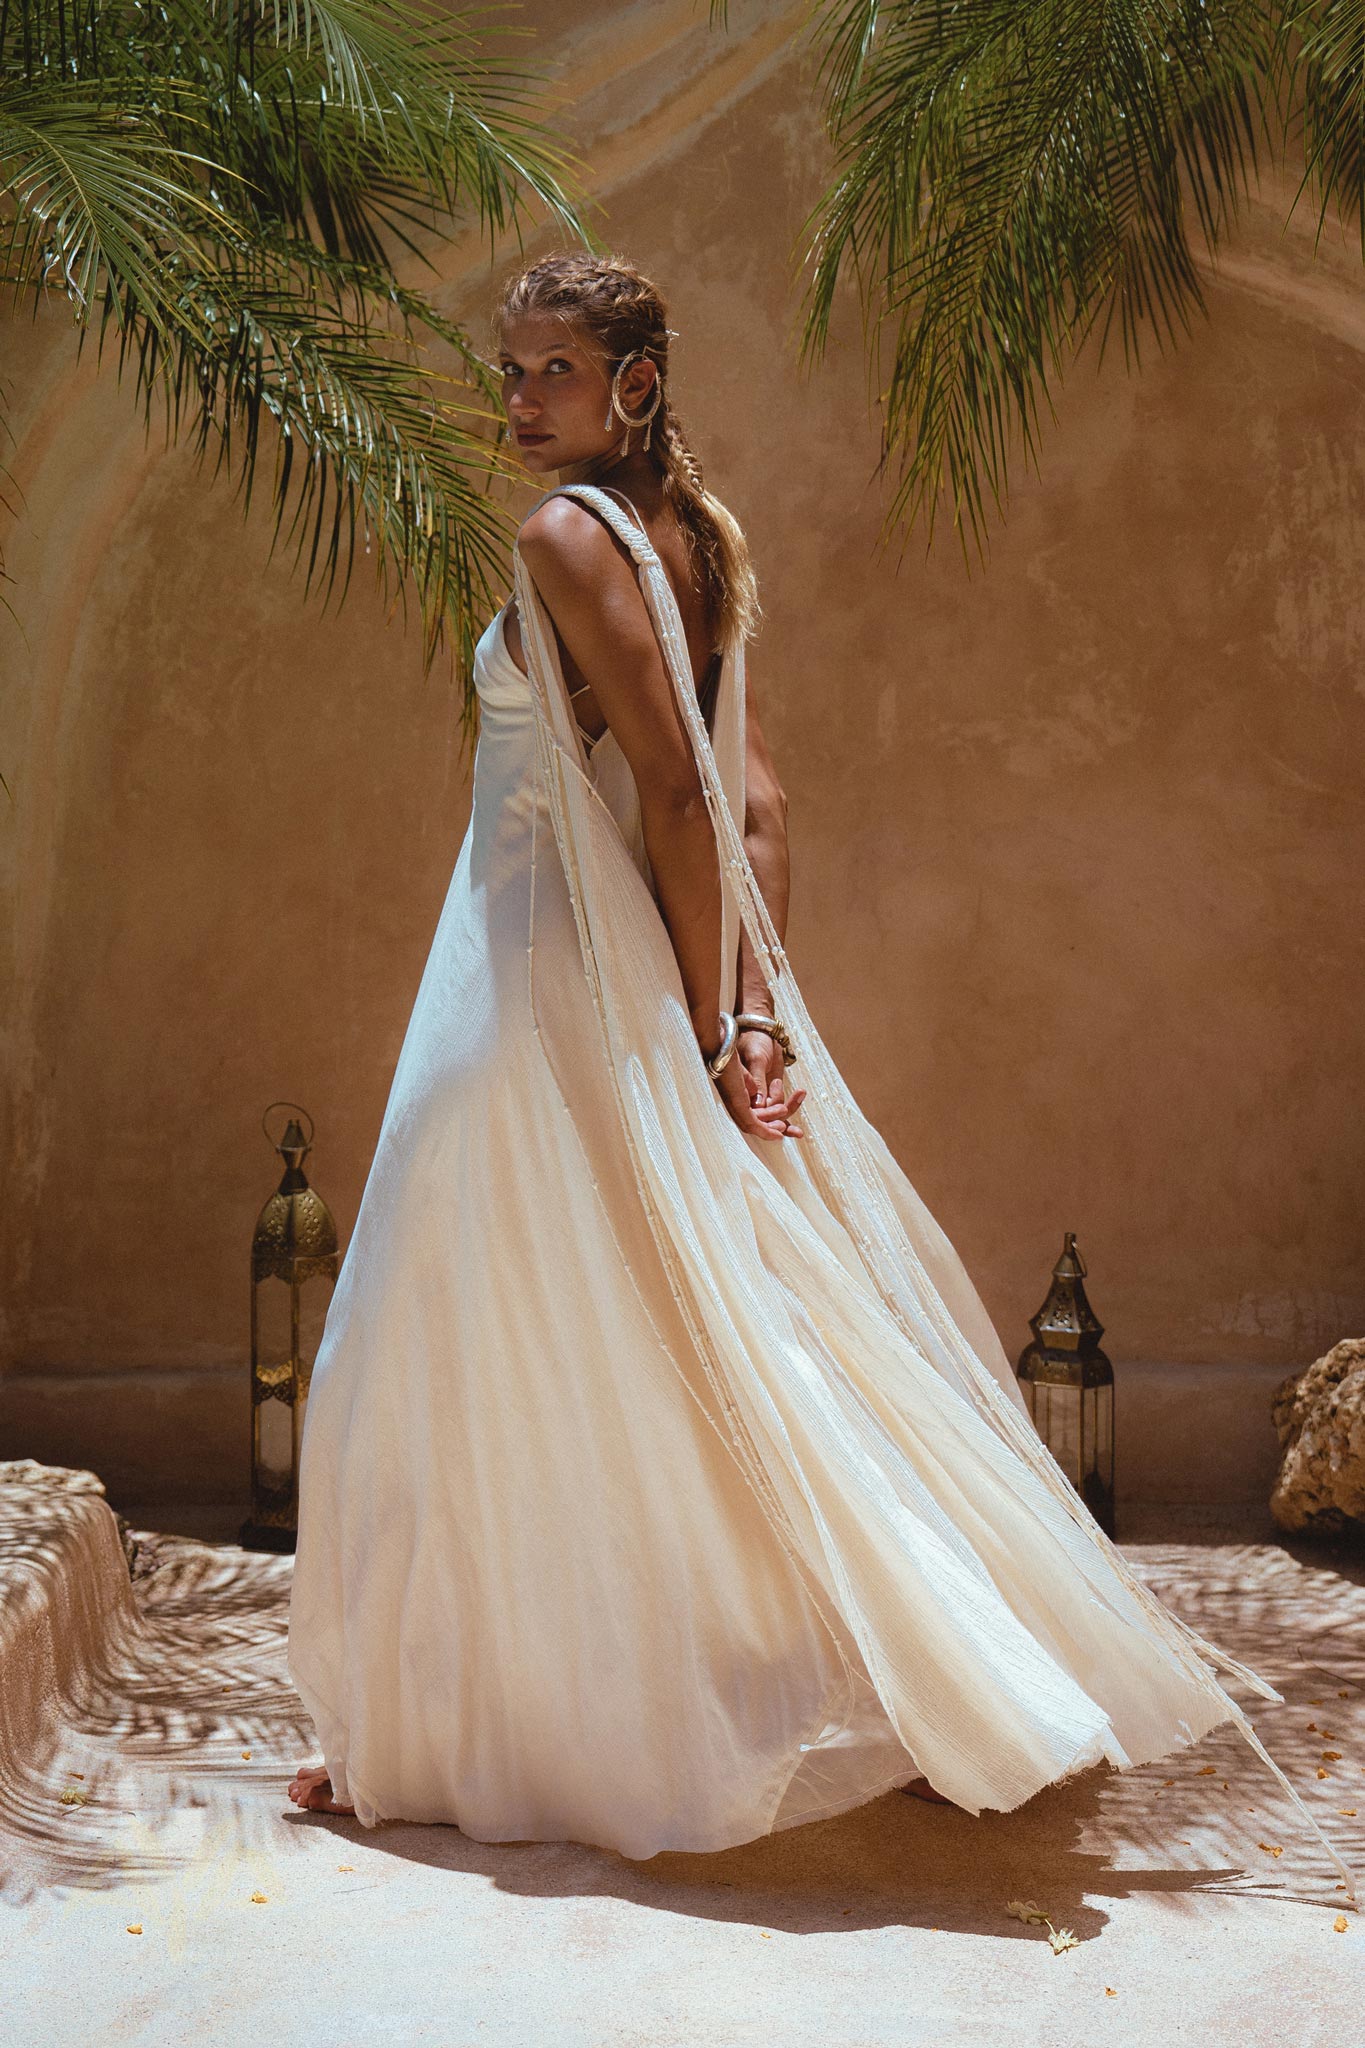 Make a bold statement in the Off-White Greek Goddess Cape Dress from Aya Sacred Wear.